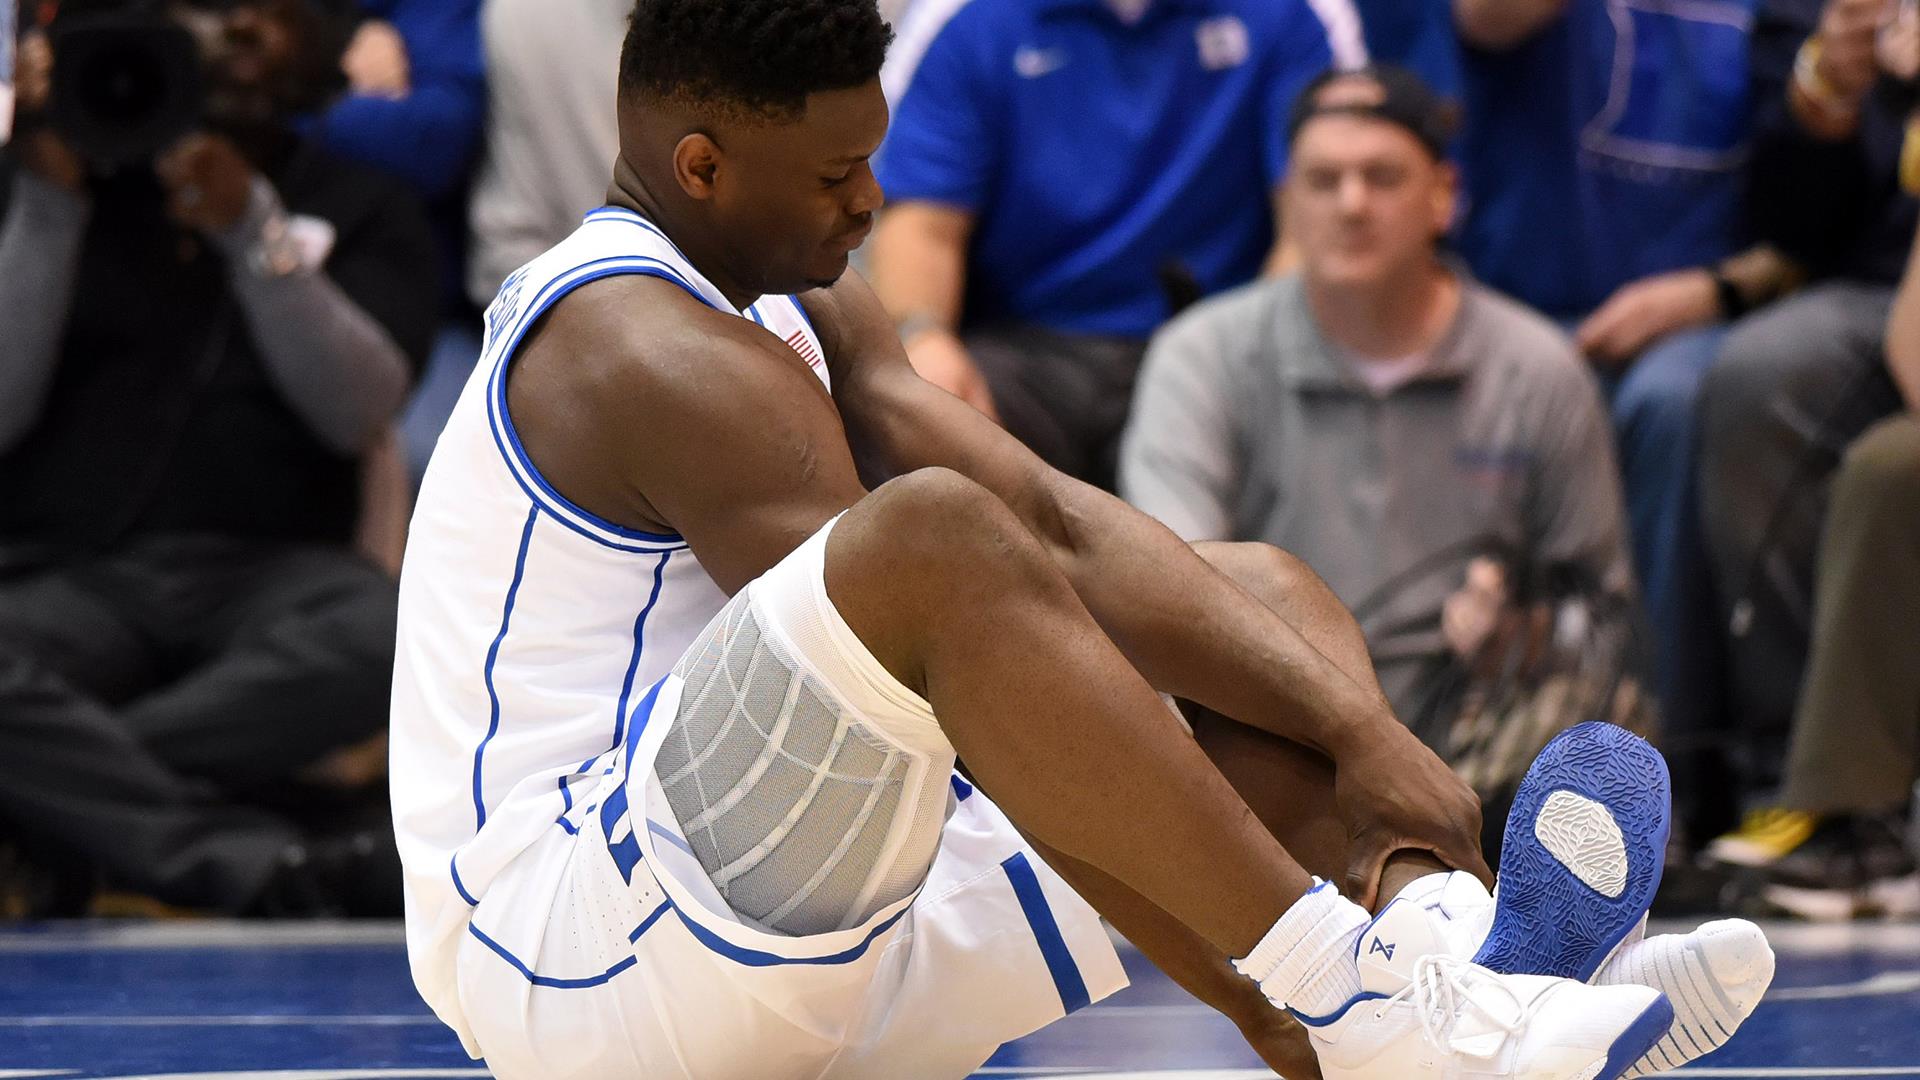 Basketball Forever - Zion Williamson is the longest tenured